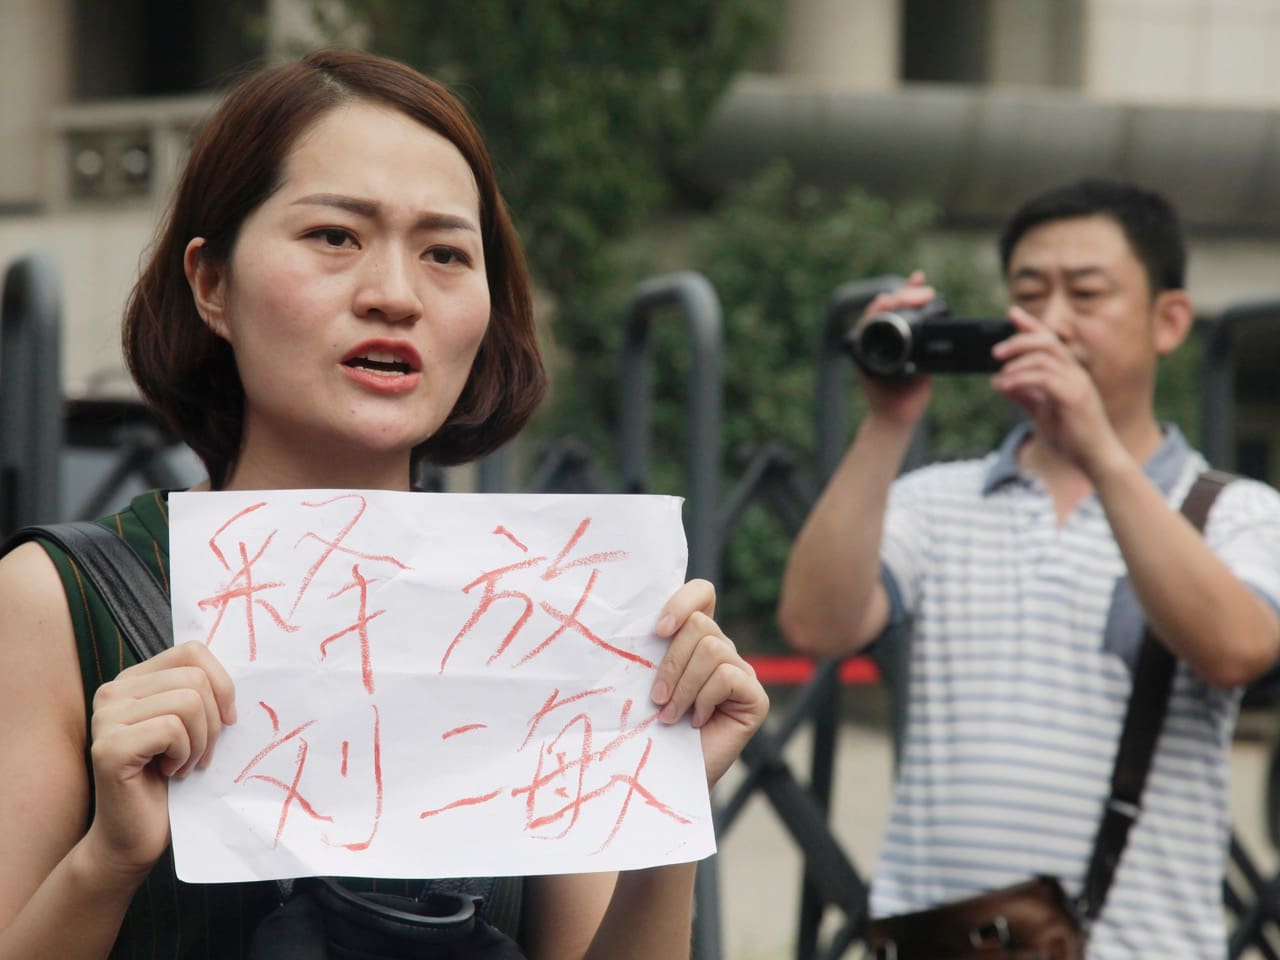 In this 1 August 2016 file photo, a man films Li Wenzu, wife of imprisoned lawyer Wang Quanzhang, during a protest outside a court in Tianjin, China, AP Photo/Gerry Shih, File